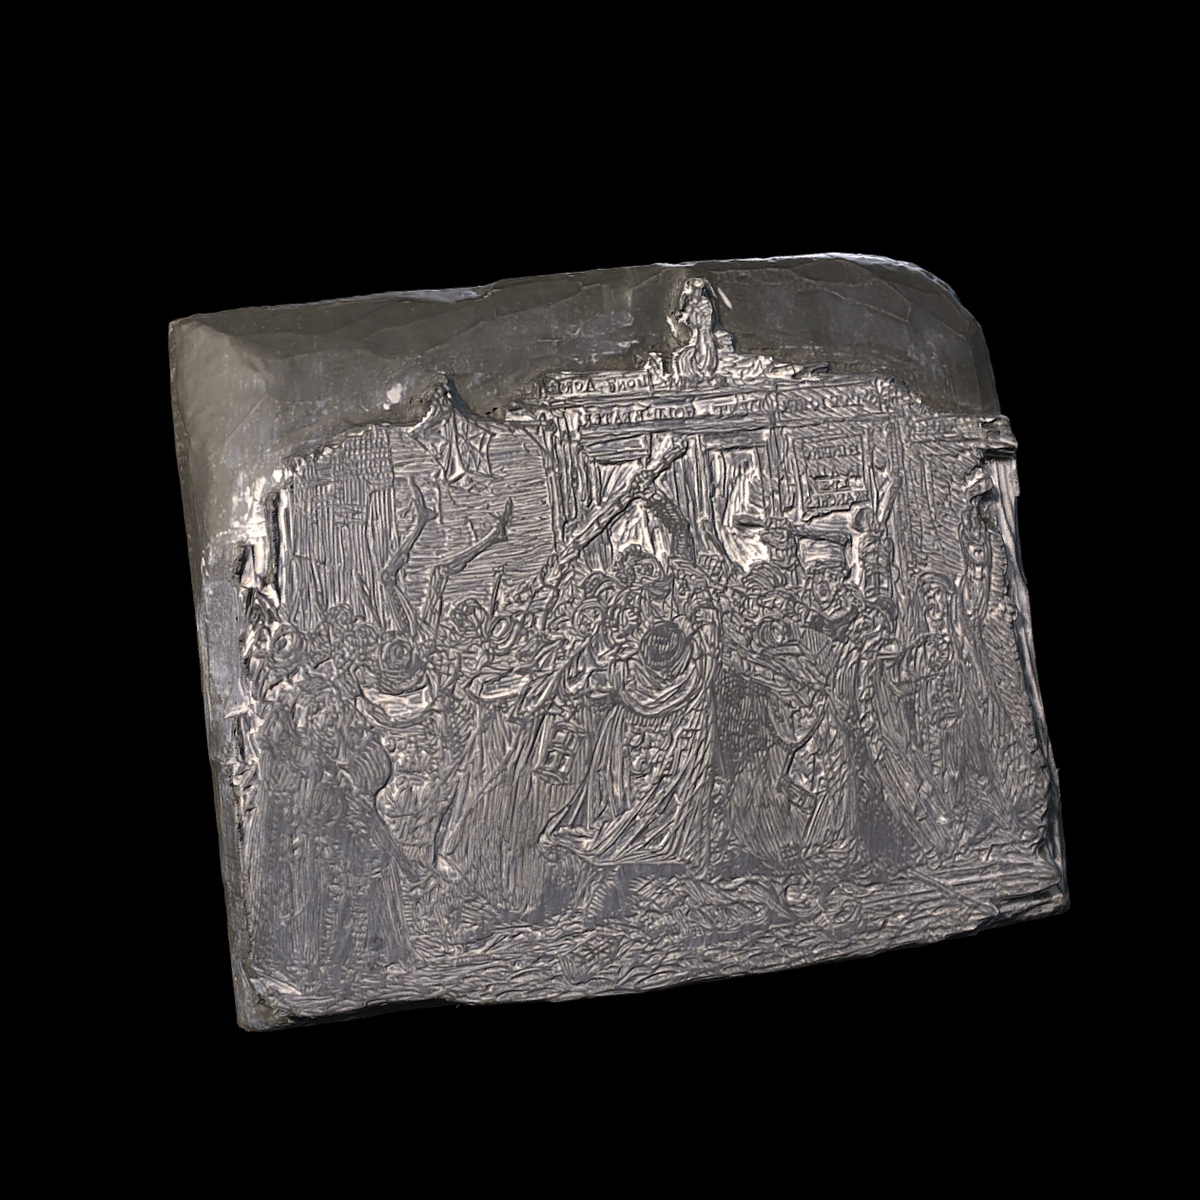 3D scan of a wood block used for printing.